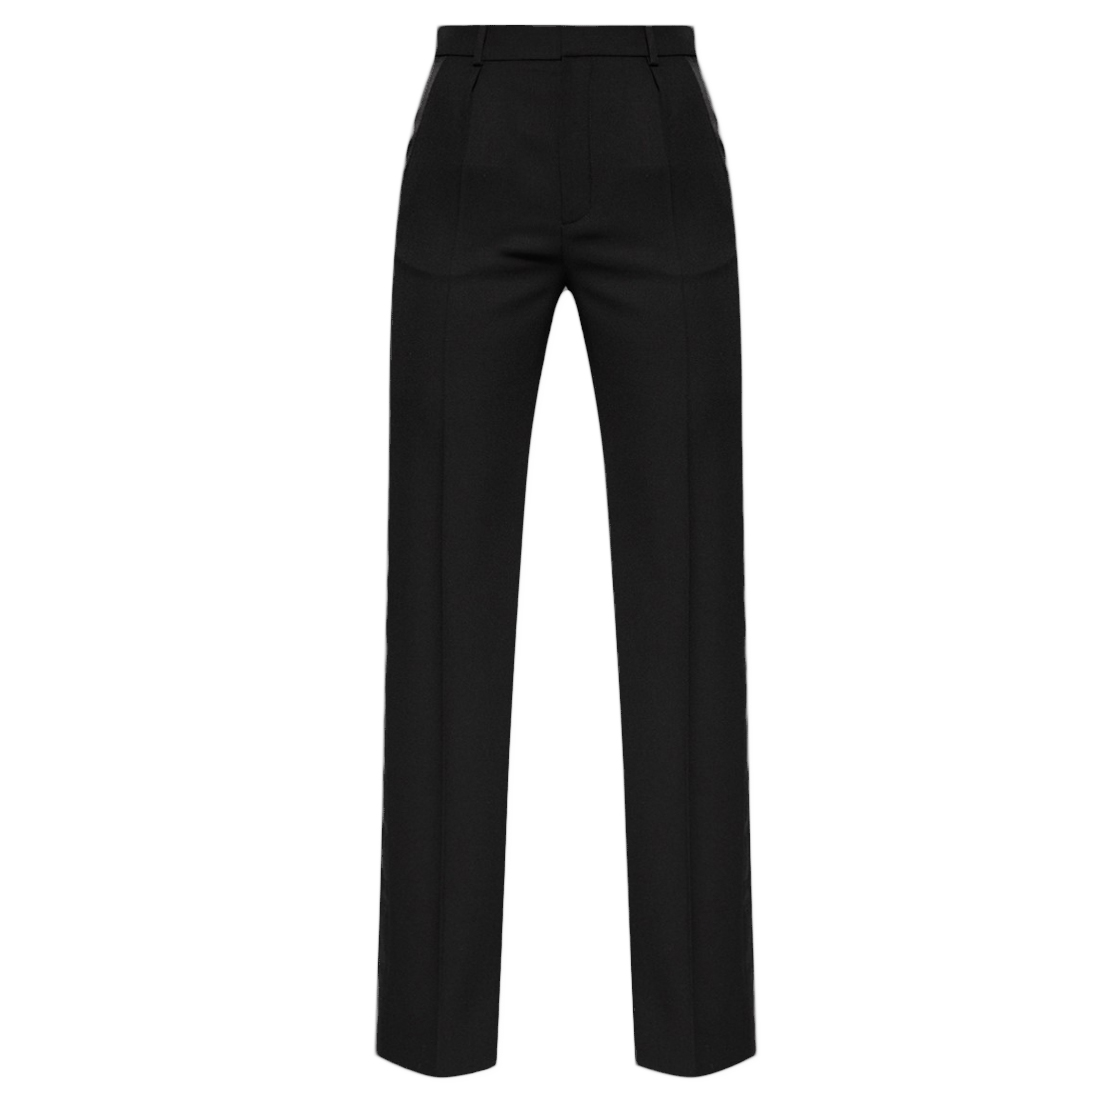 Women's 'Band' Trousers